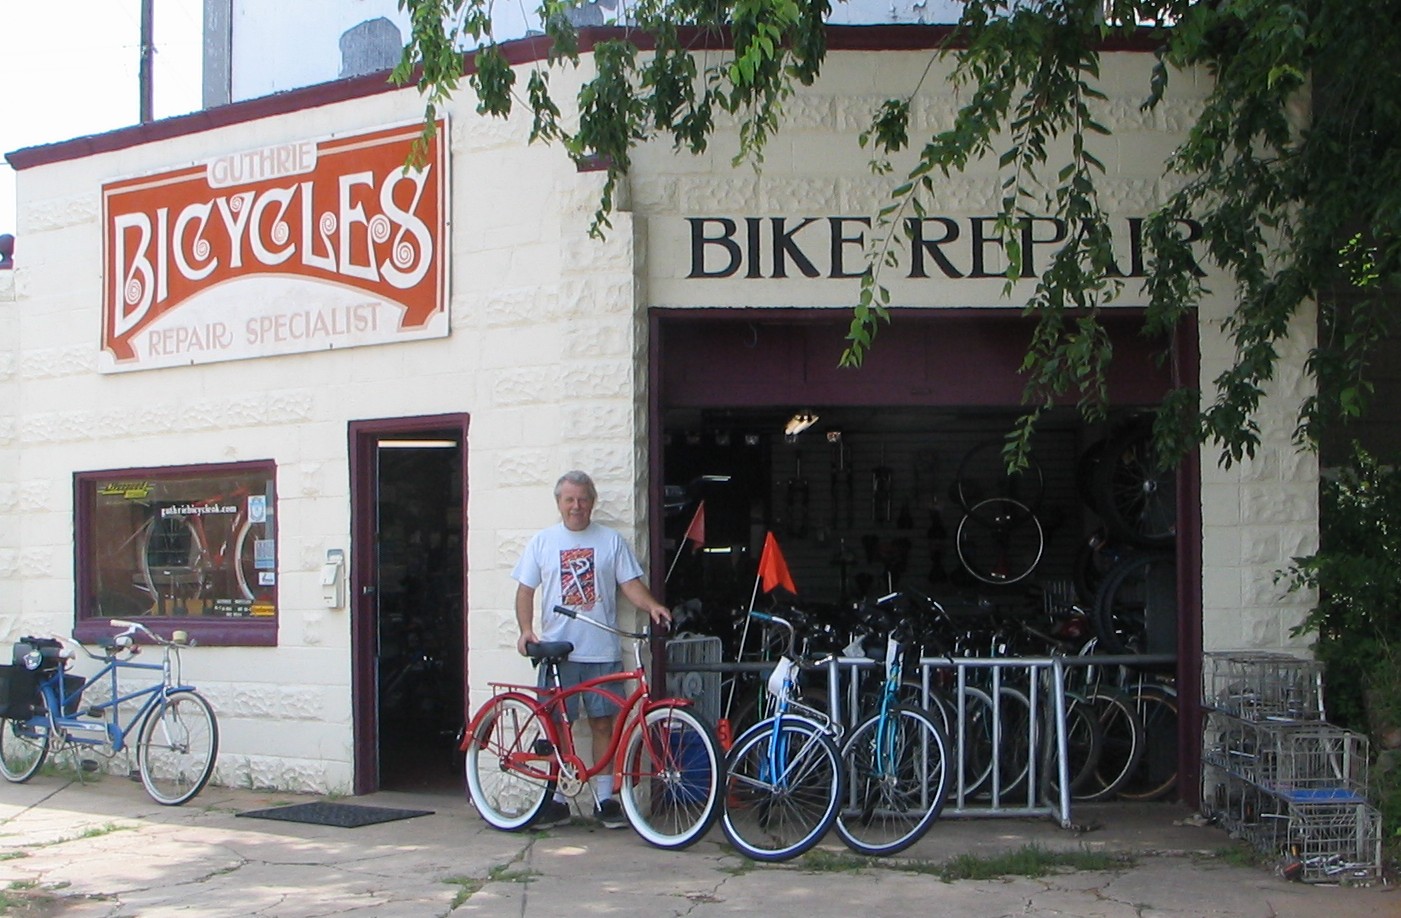 Guthrie Bicycle Shop